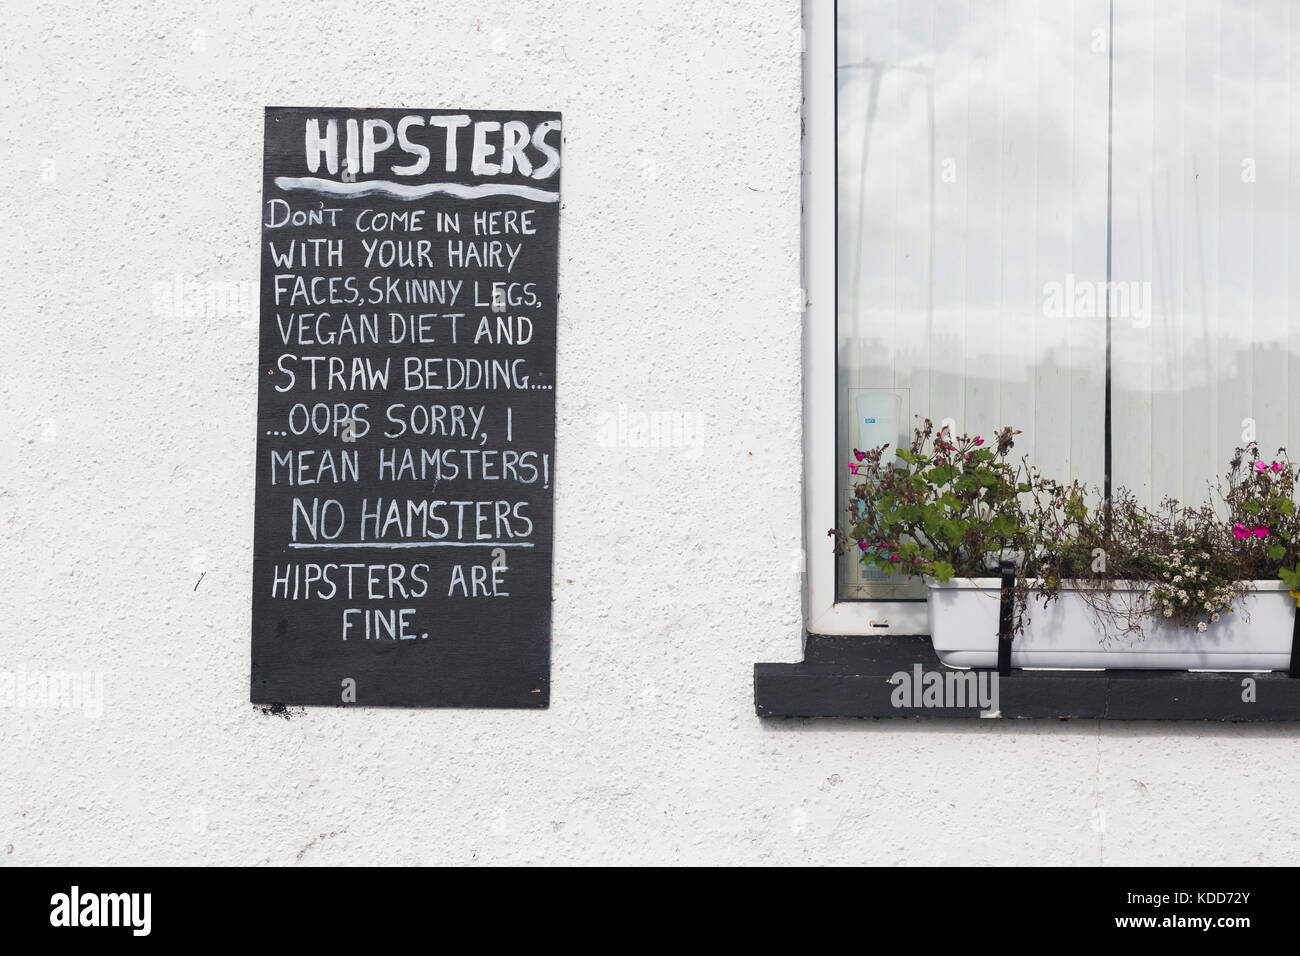 Funny sign outside pub confusing hipsters with hamsters Stock Photo